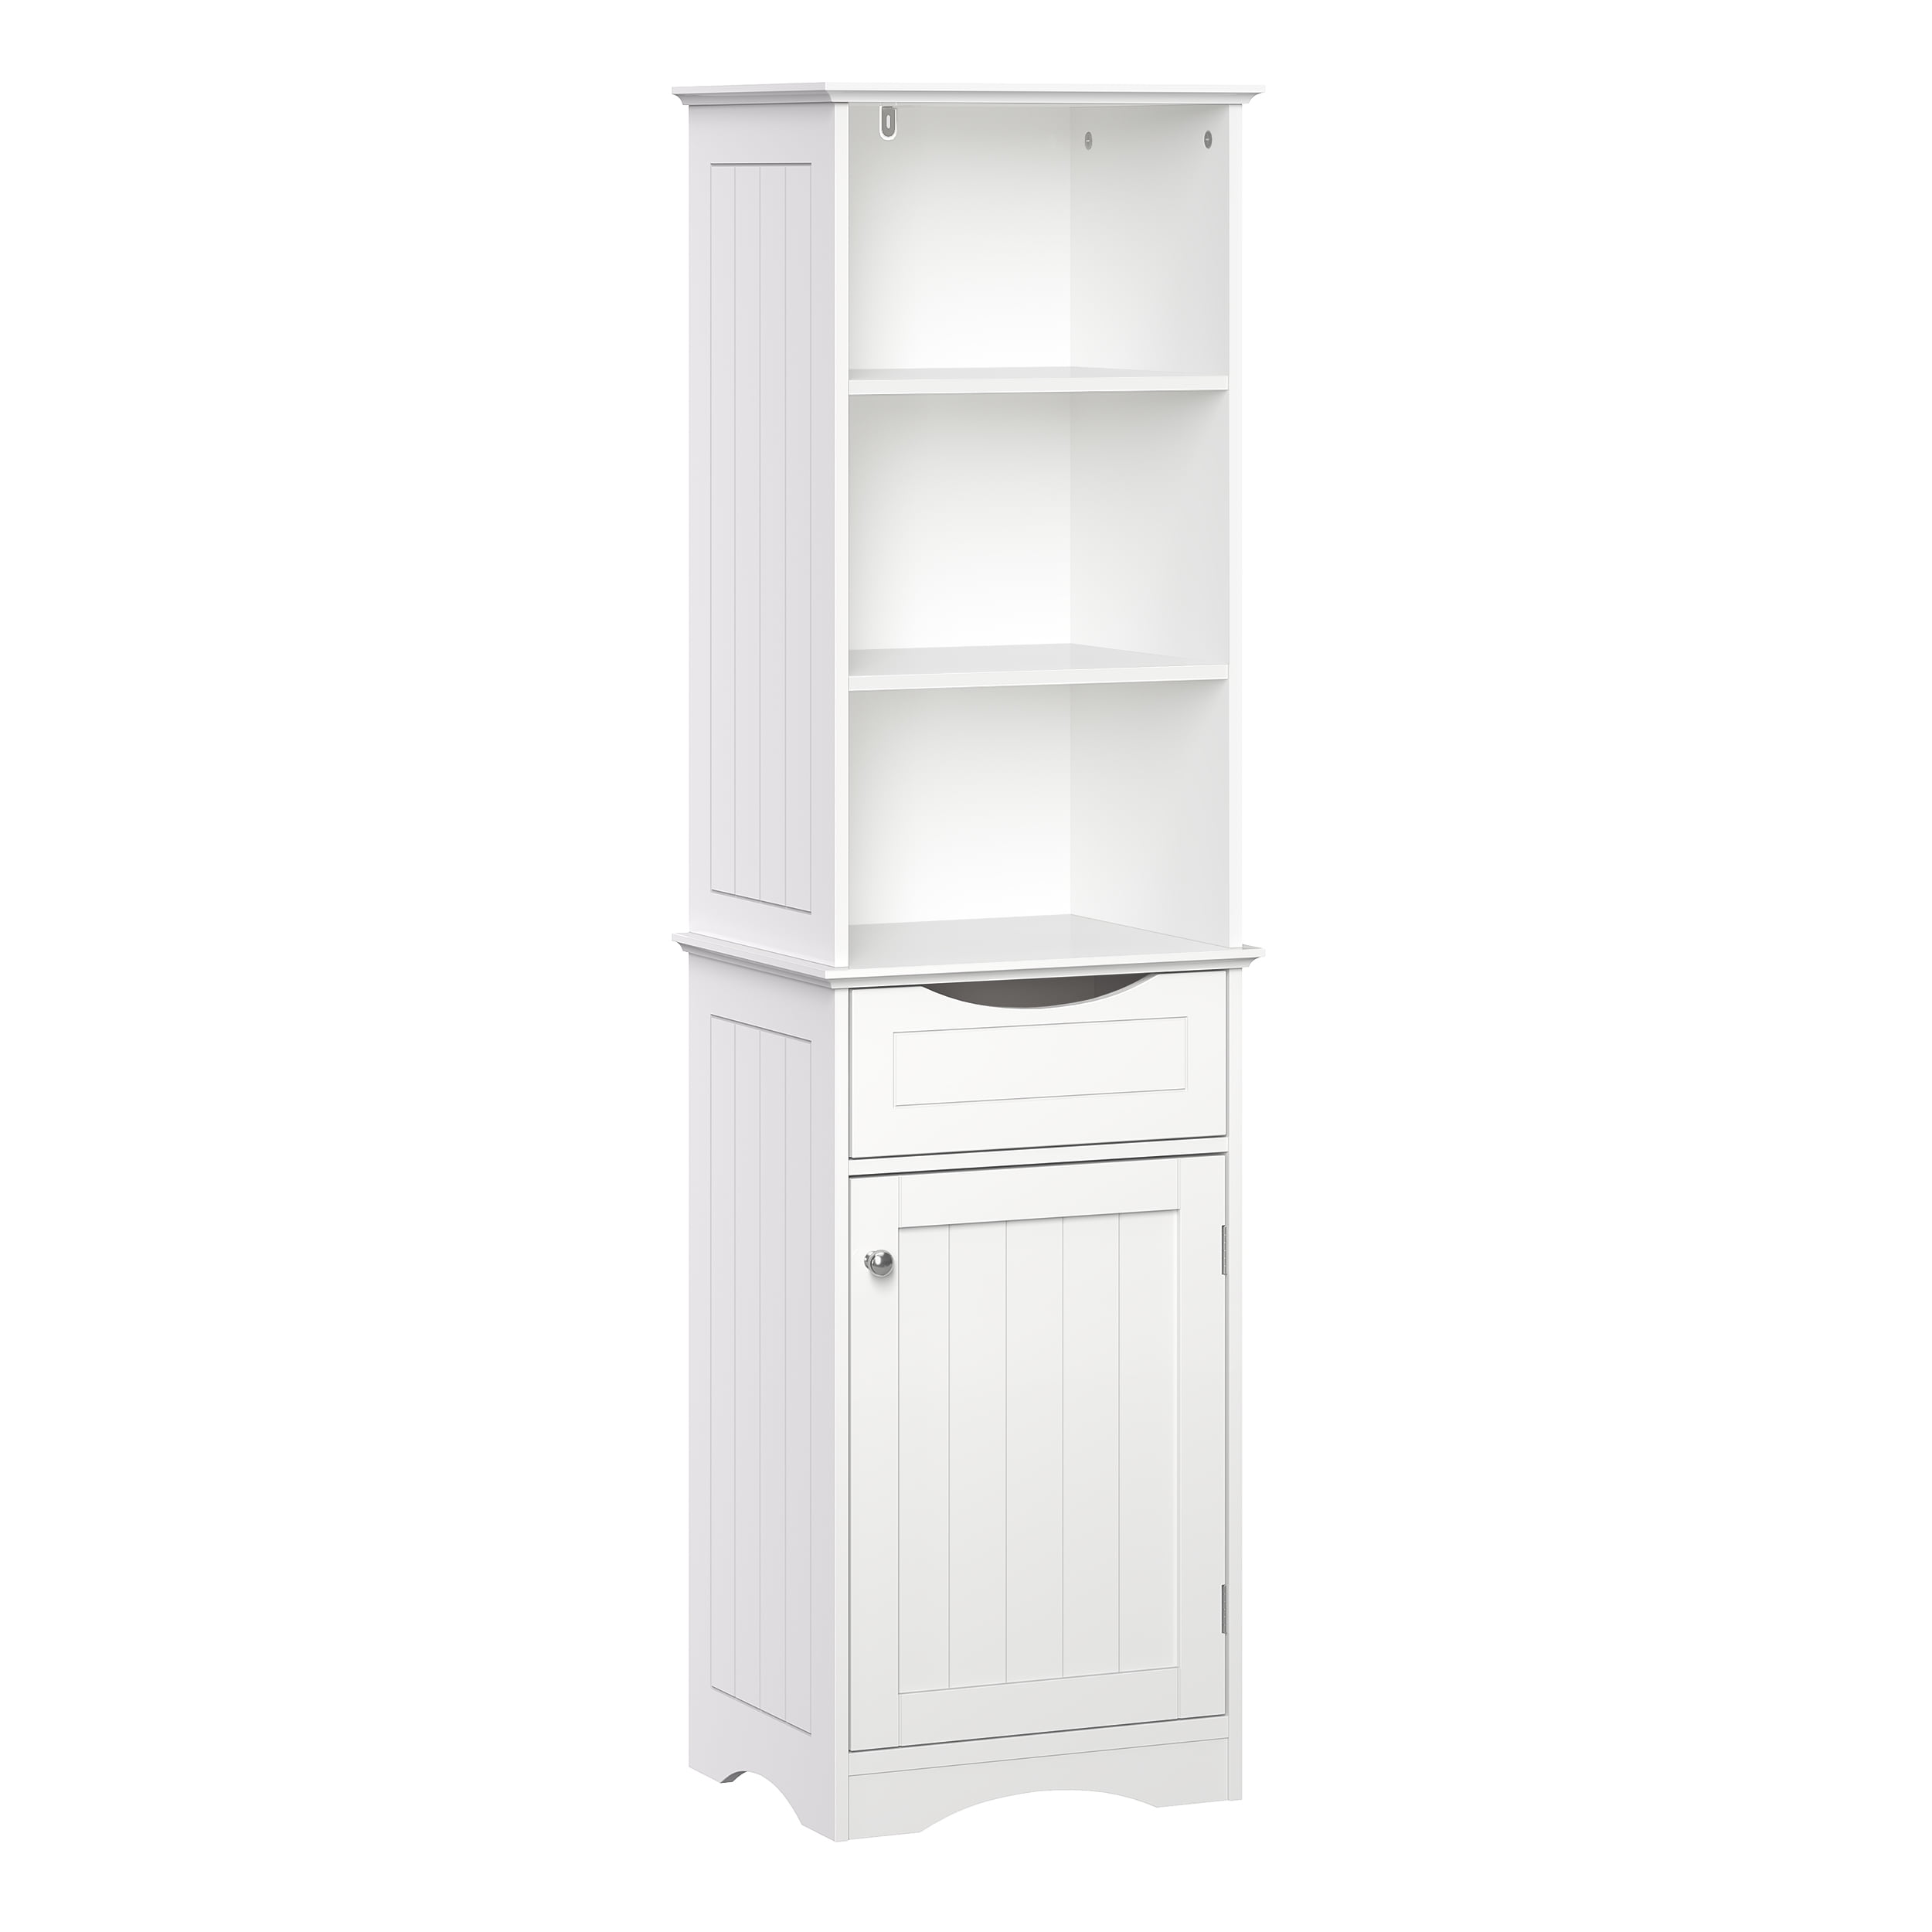 Riverridge Home Ashland Tall Linen, Tall Cabinet With Shelves And Drawers